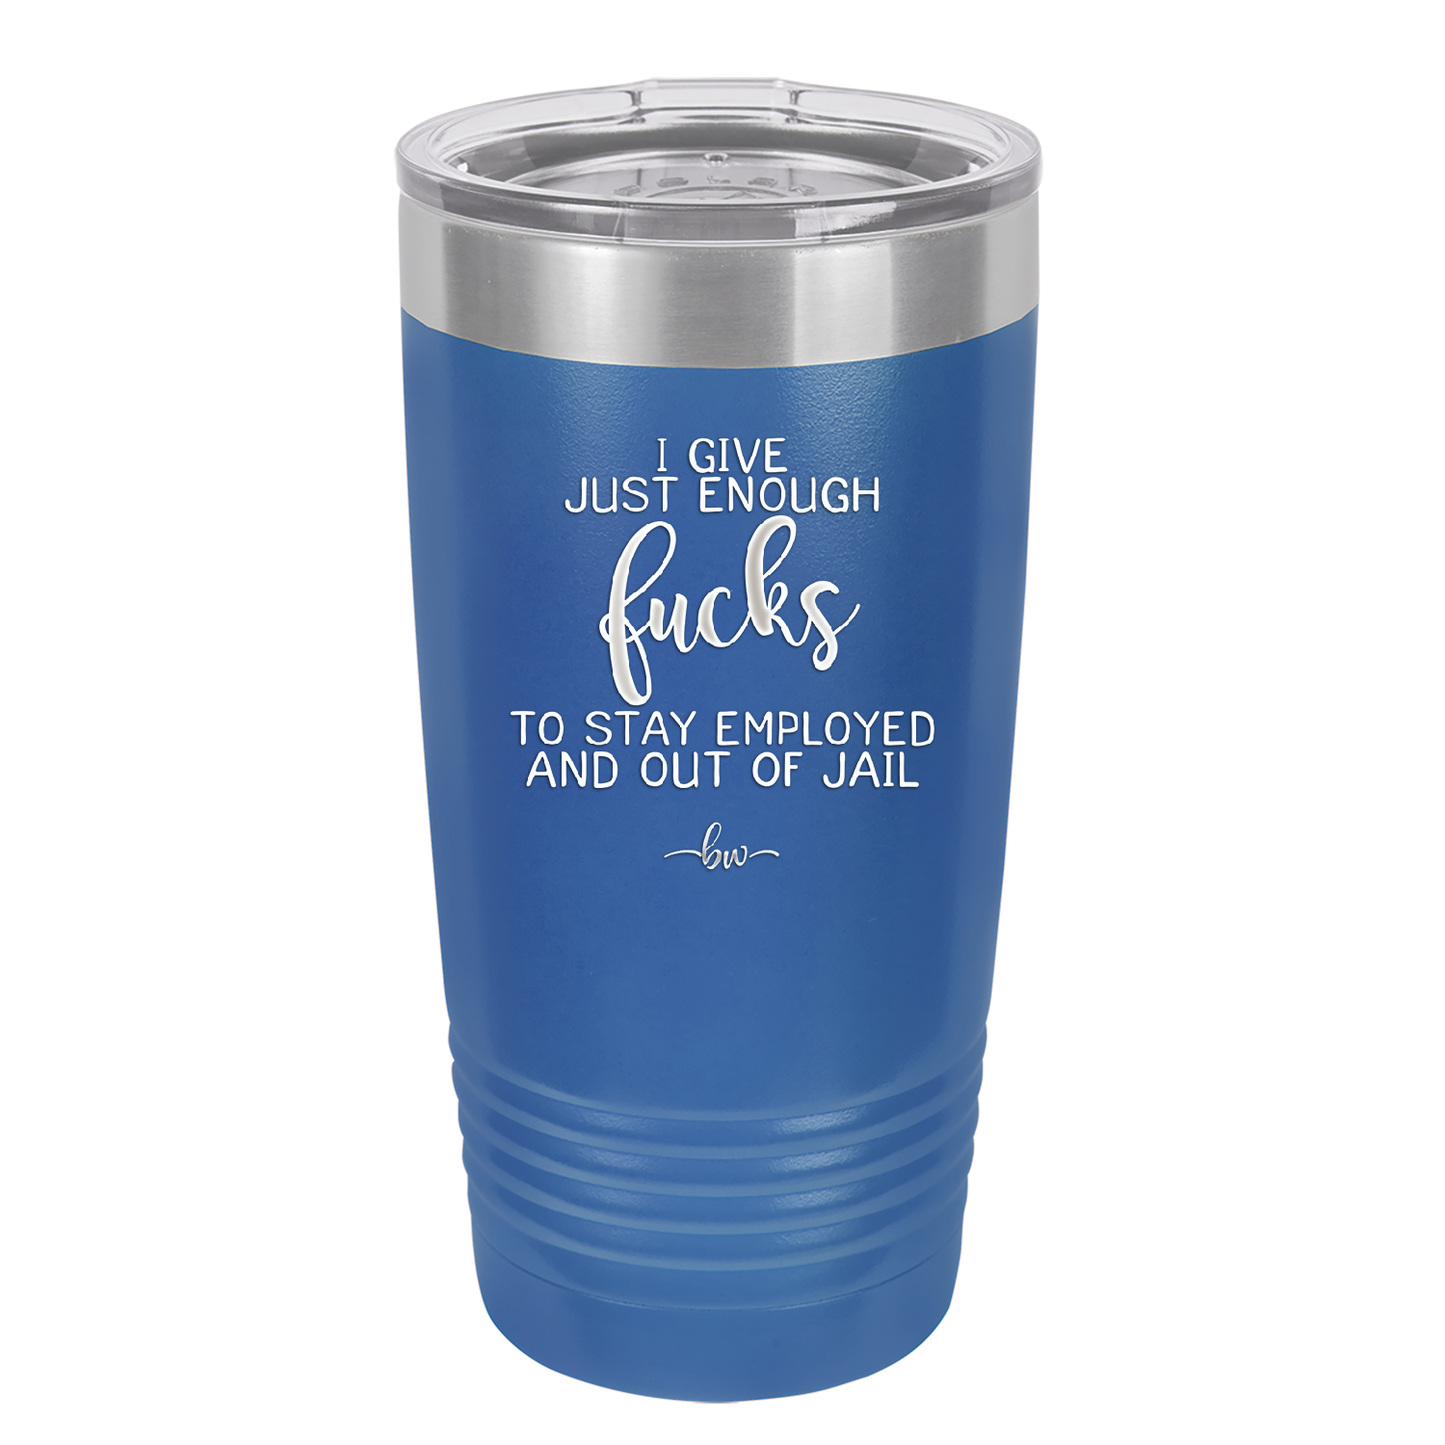 I Give Just Enough Fucks to Stay Employed and Out of Jail - Laser Engraved Stainless Steel Drinkware - 2291 -